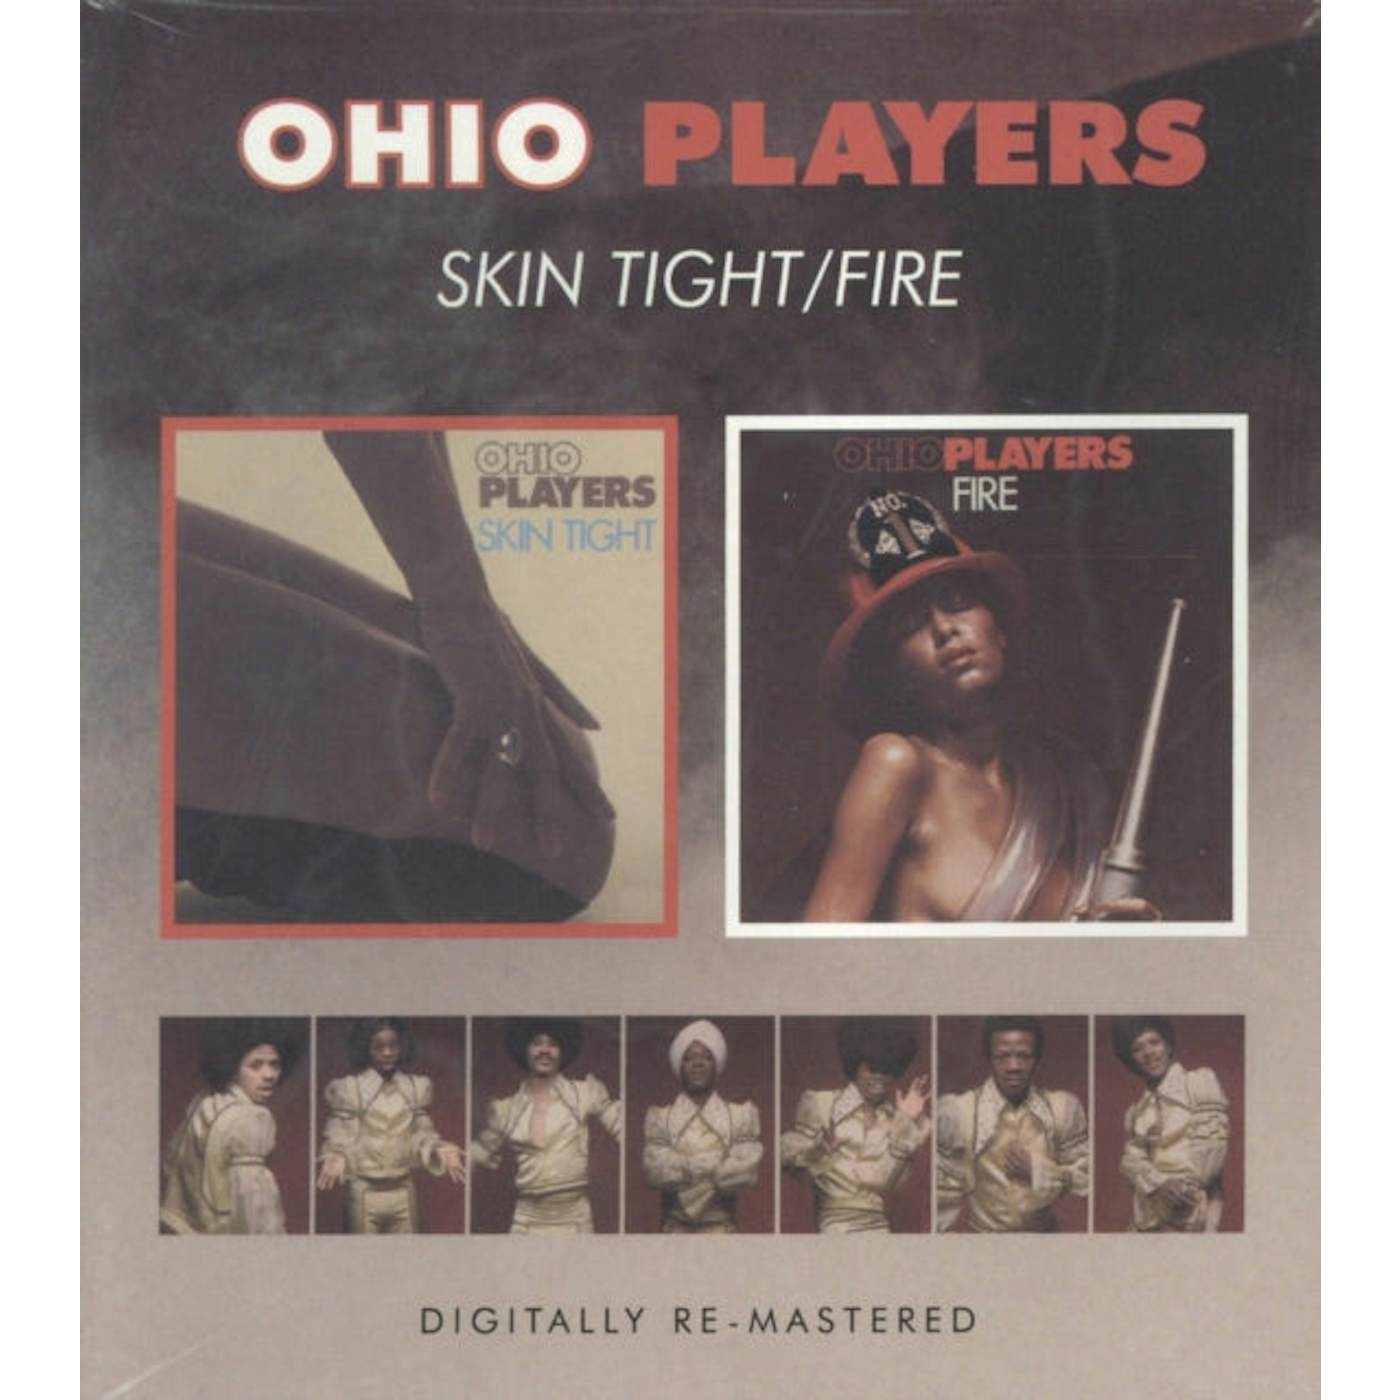 Ohio Players CD - Skin Tight / Fire (24bit Remastered)